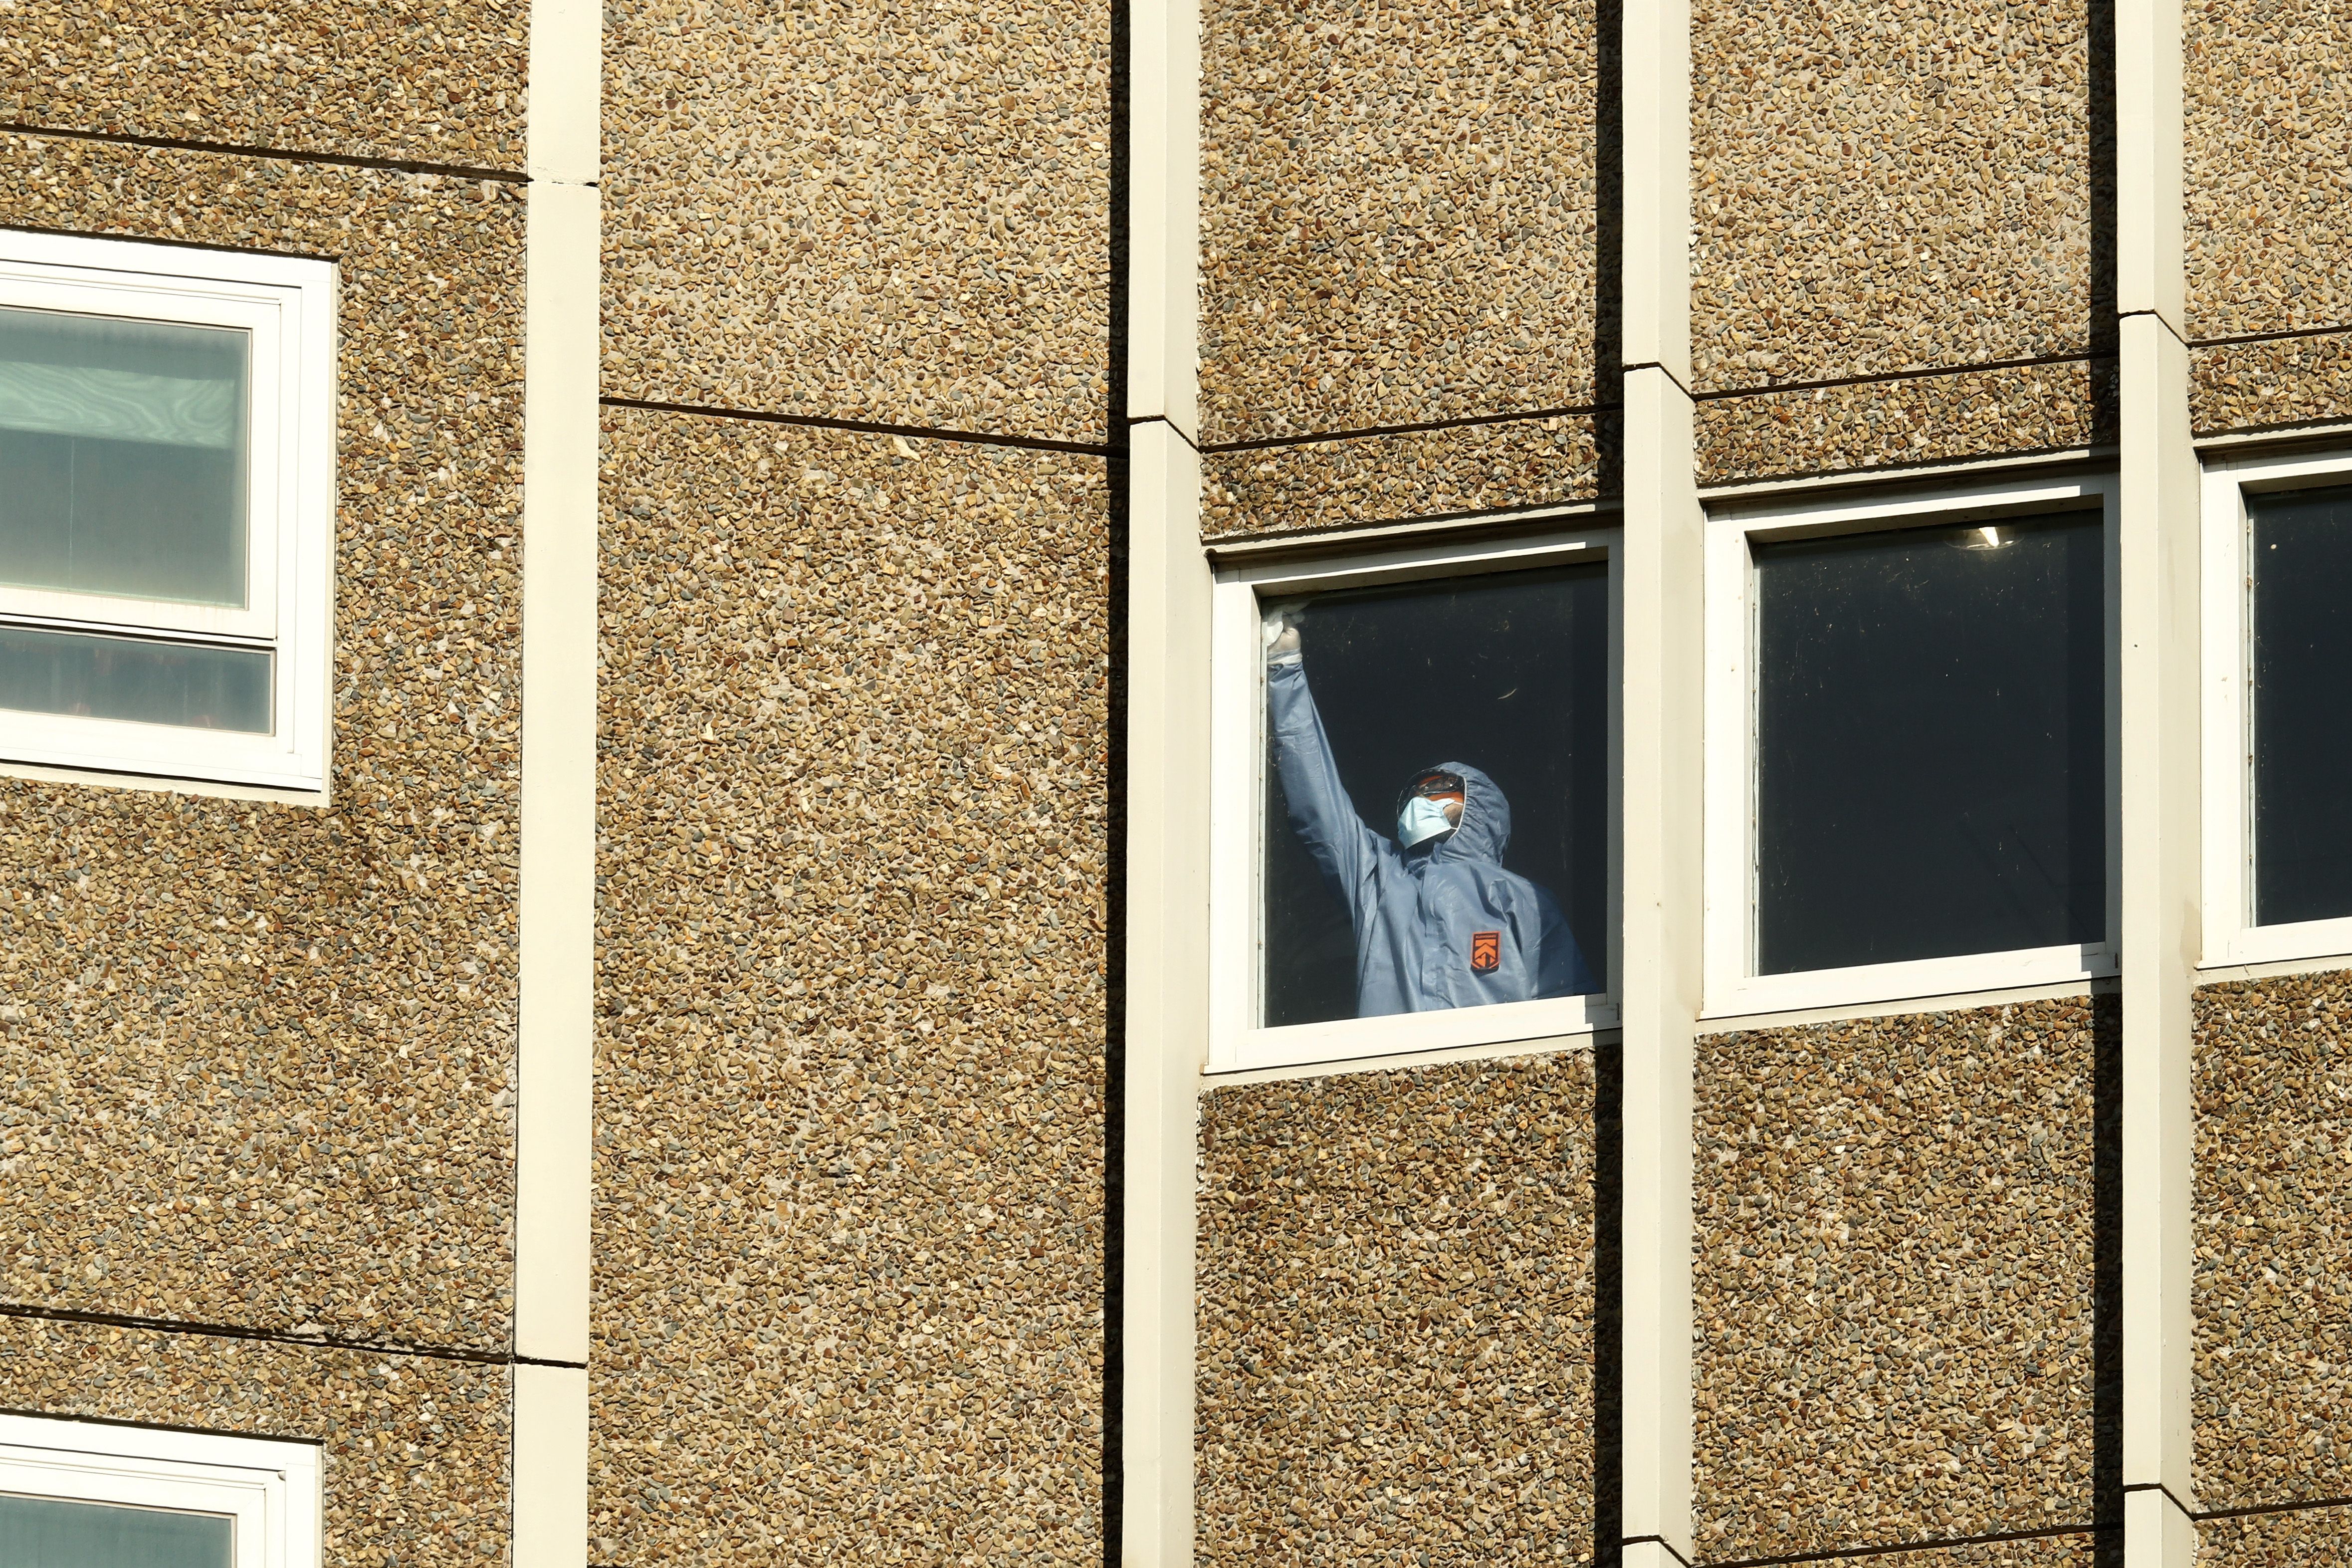 Cleaning takes place inside the Alfred Street Public Housing Complex in North Melbourne on July 17